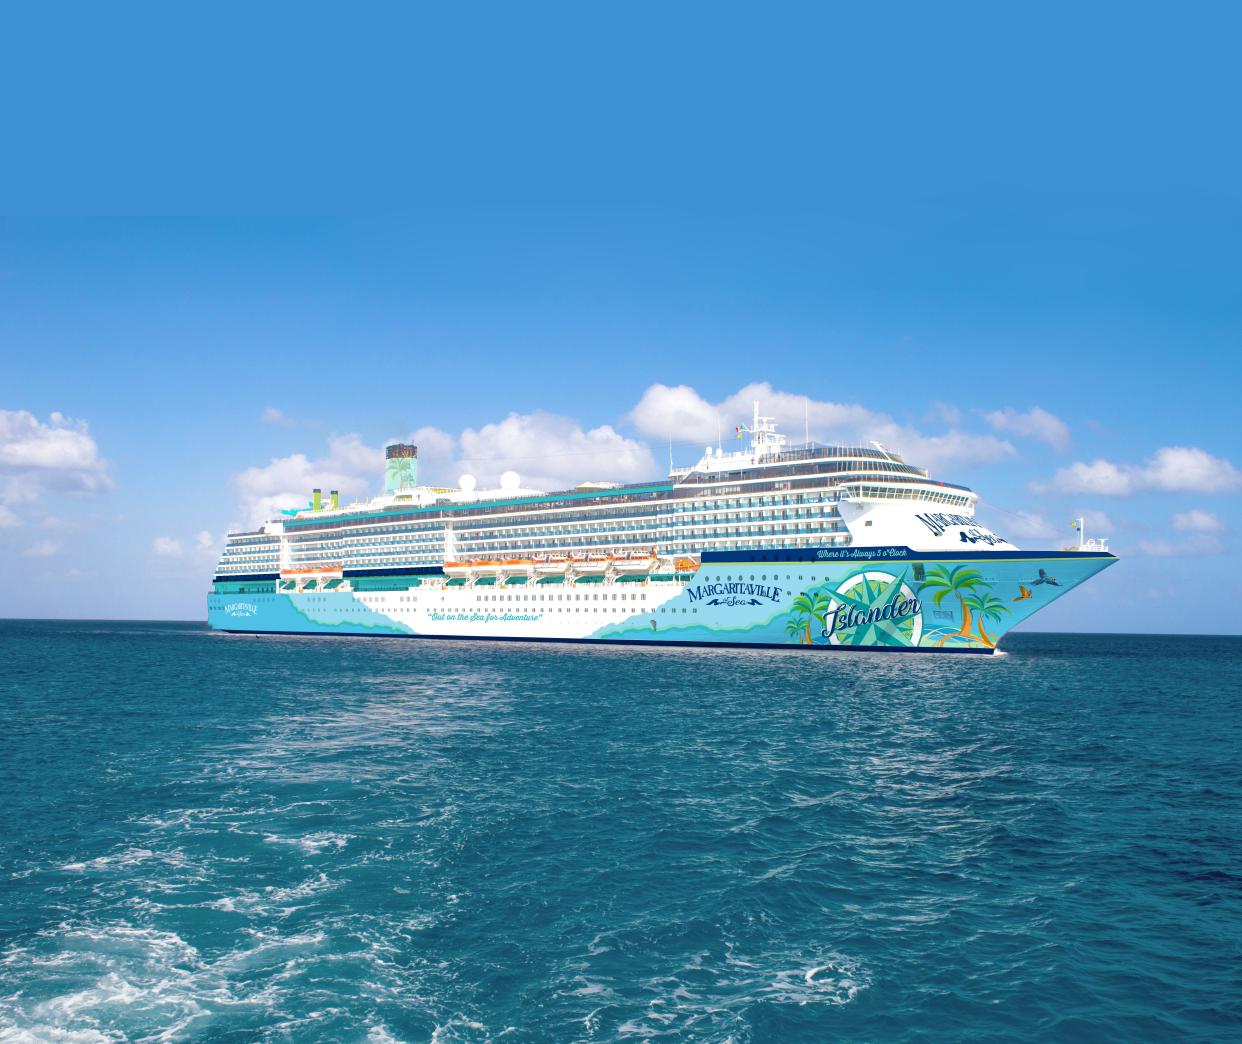 Exterior picture of Margaritaville's second ship, the Islander. Much larger than the one based at Port of Palm Beach, the new ship, currently being renovated to reflect the Jimmy Buffett theme, will be based in Port Tampa, offering cruises to Key West and Mexico.